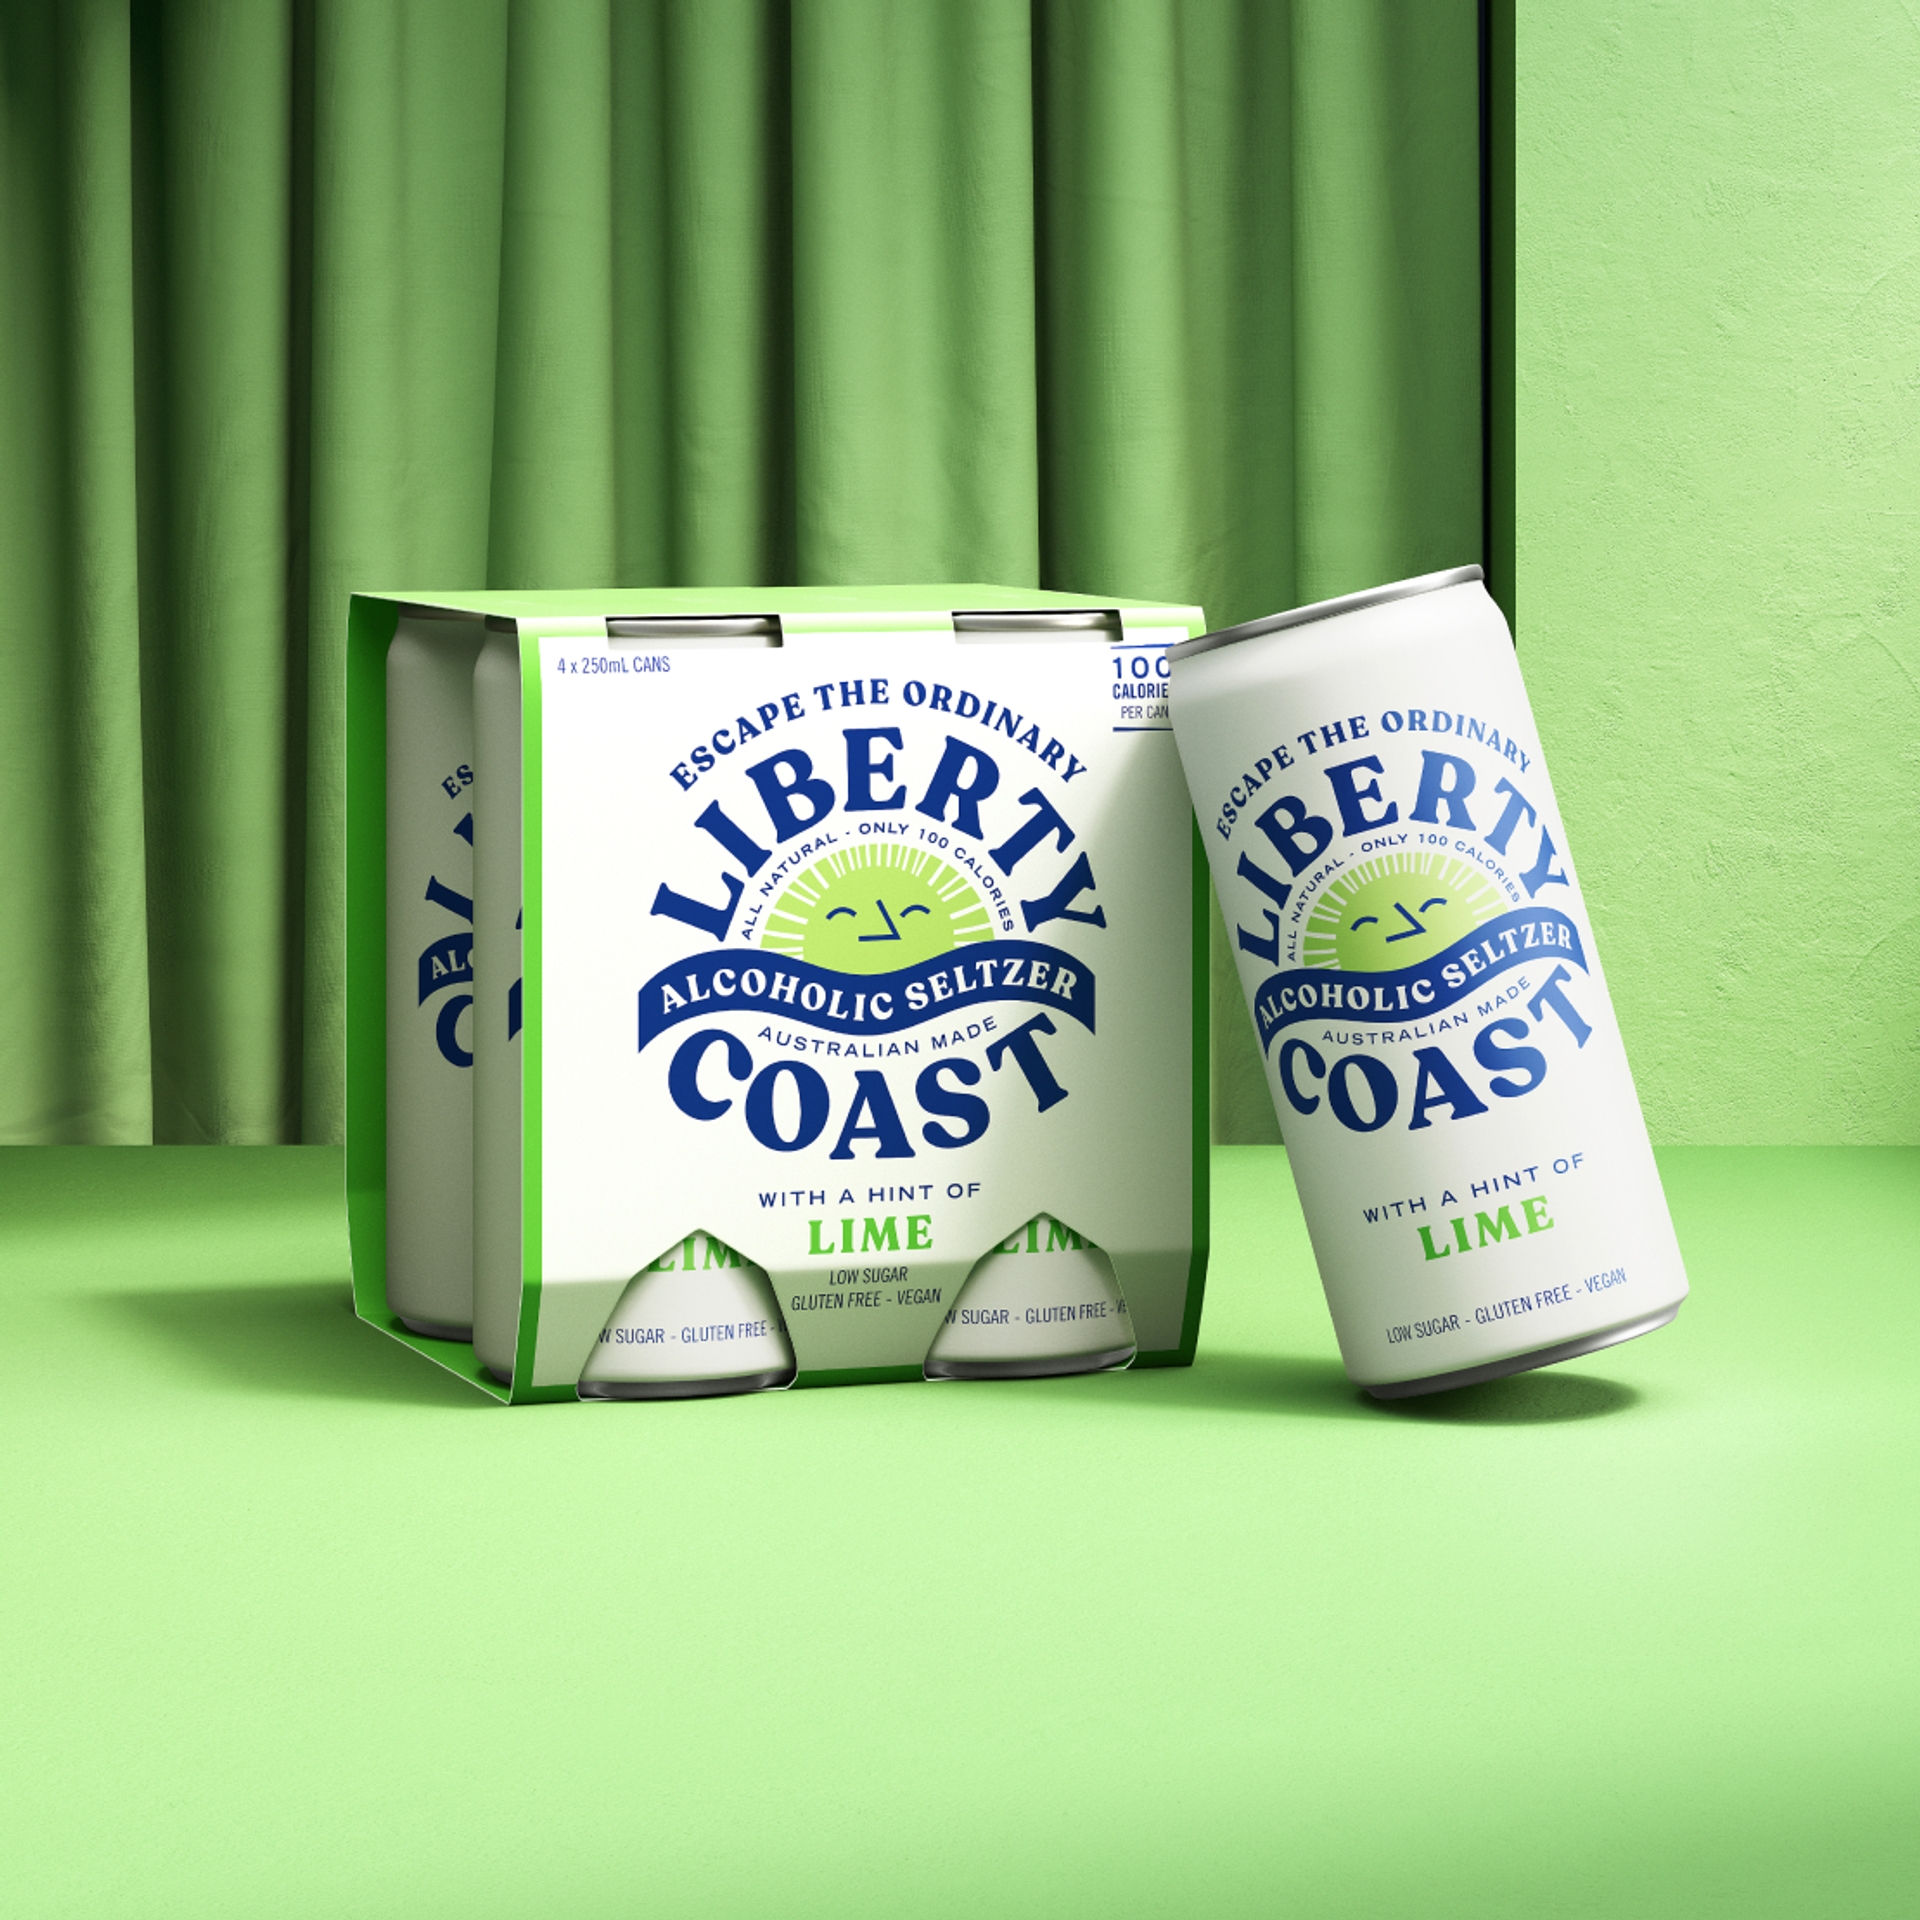 Liberty Coast seltzer packaging design by Our Revolution for alcoholic seltzer brand Liberty Coast in front of a green curtain